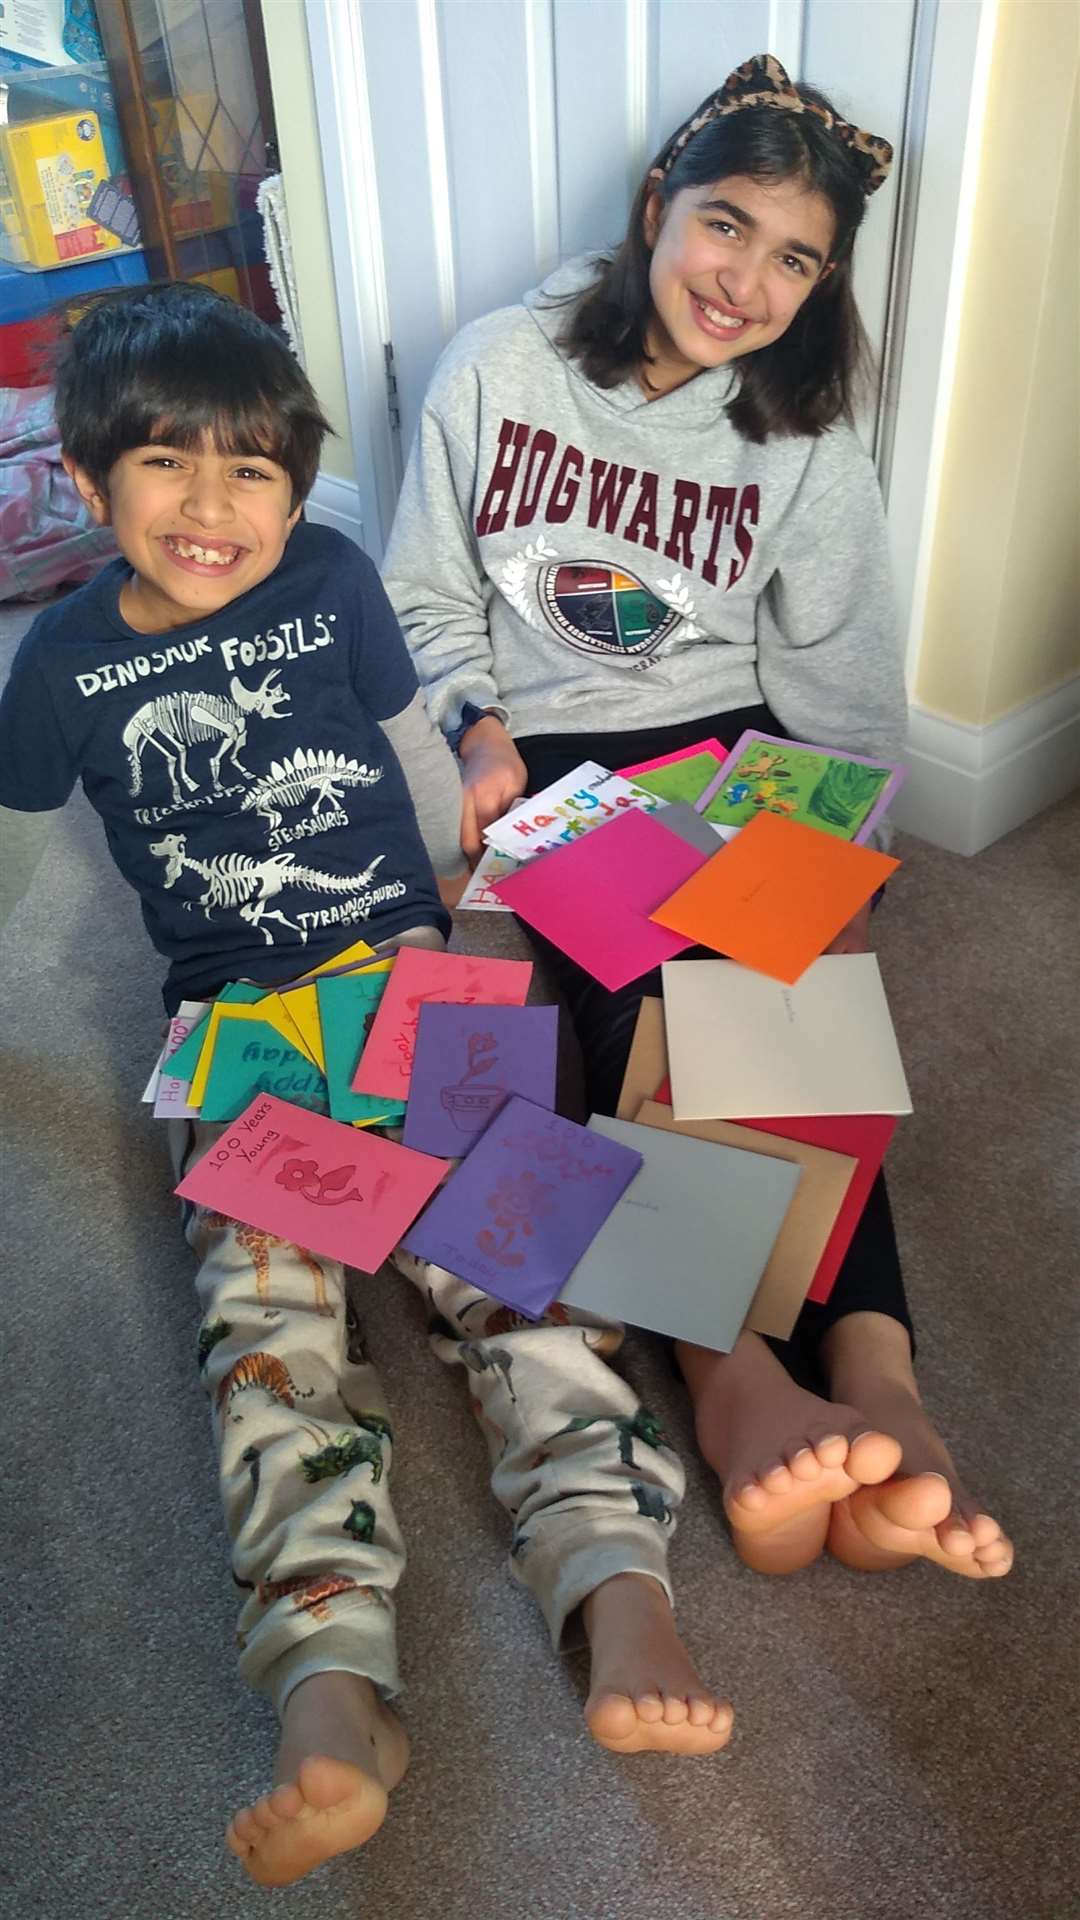 Blanche's great-grandchildren, Amelia and Isaac, with birthday cards for their great-nan's 100th birthday